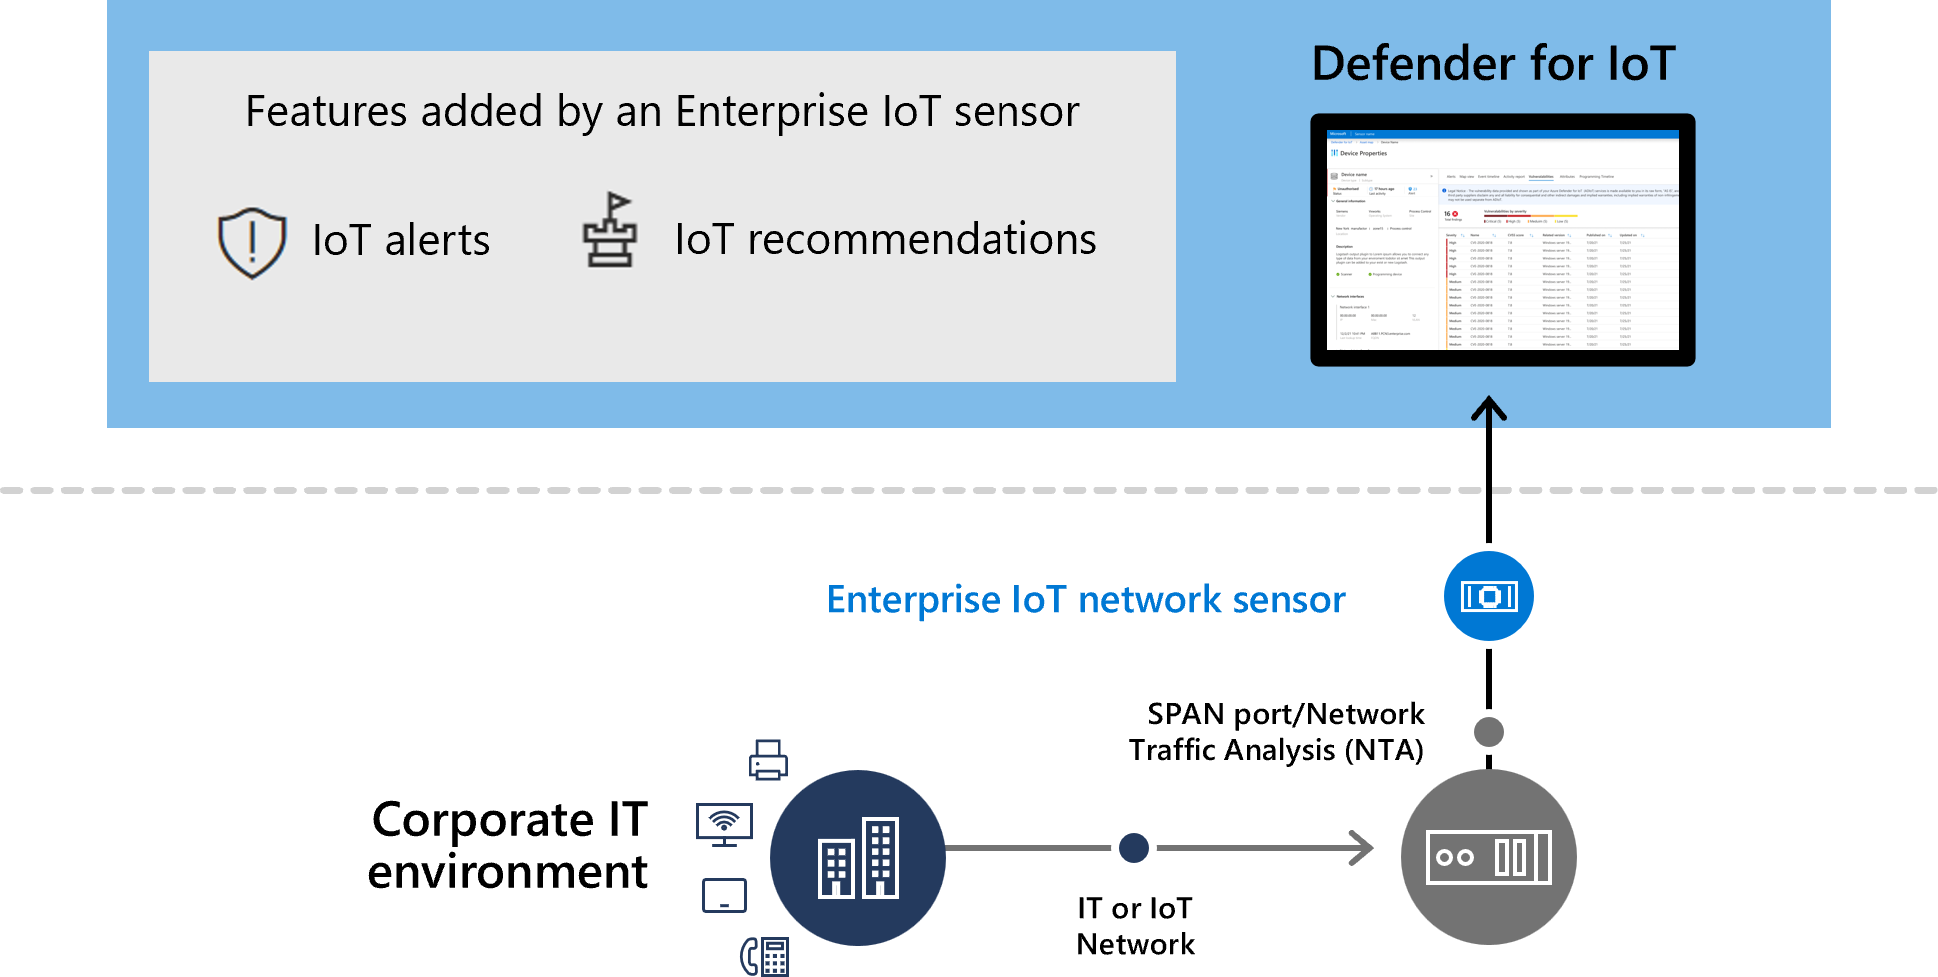 Diagram of an Enterprise IoT network sensor with Defender for IoT only.